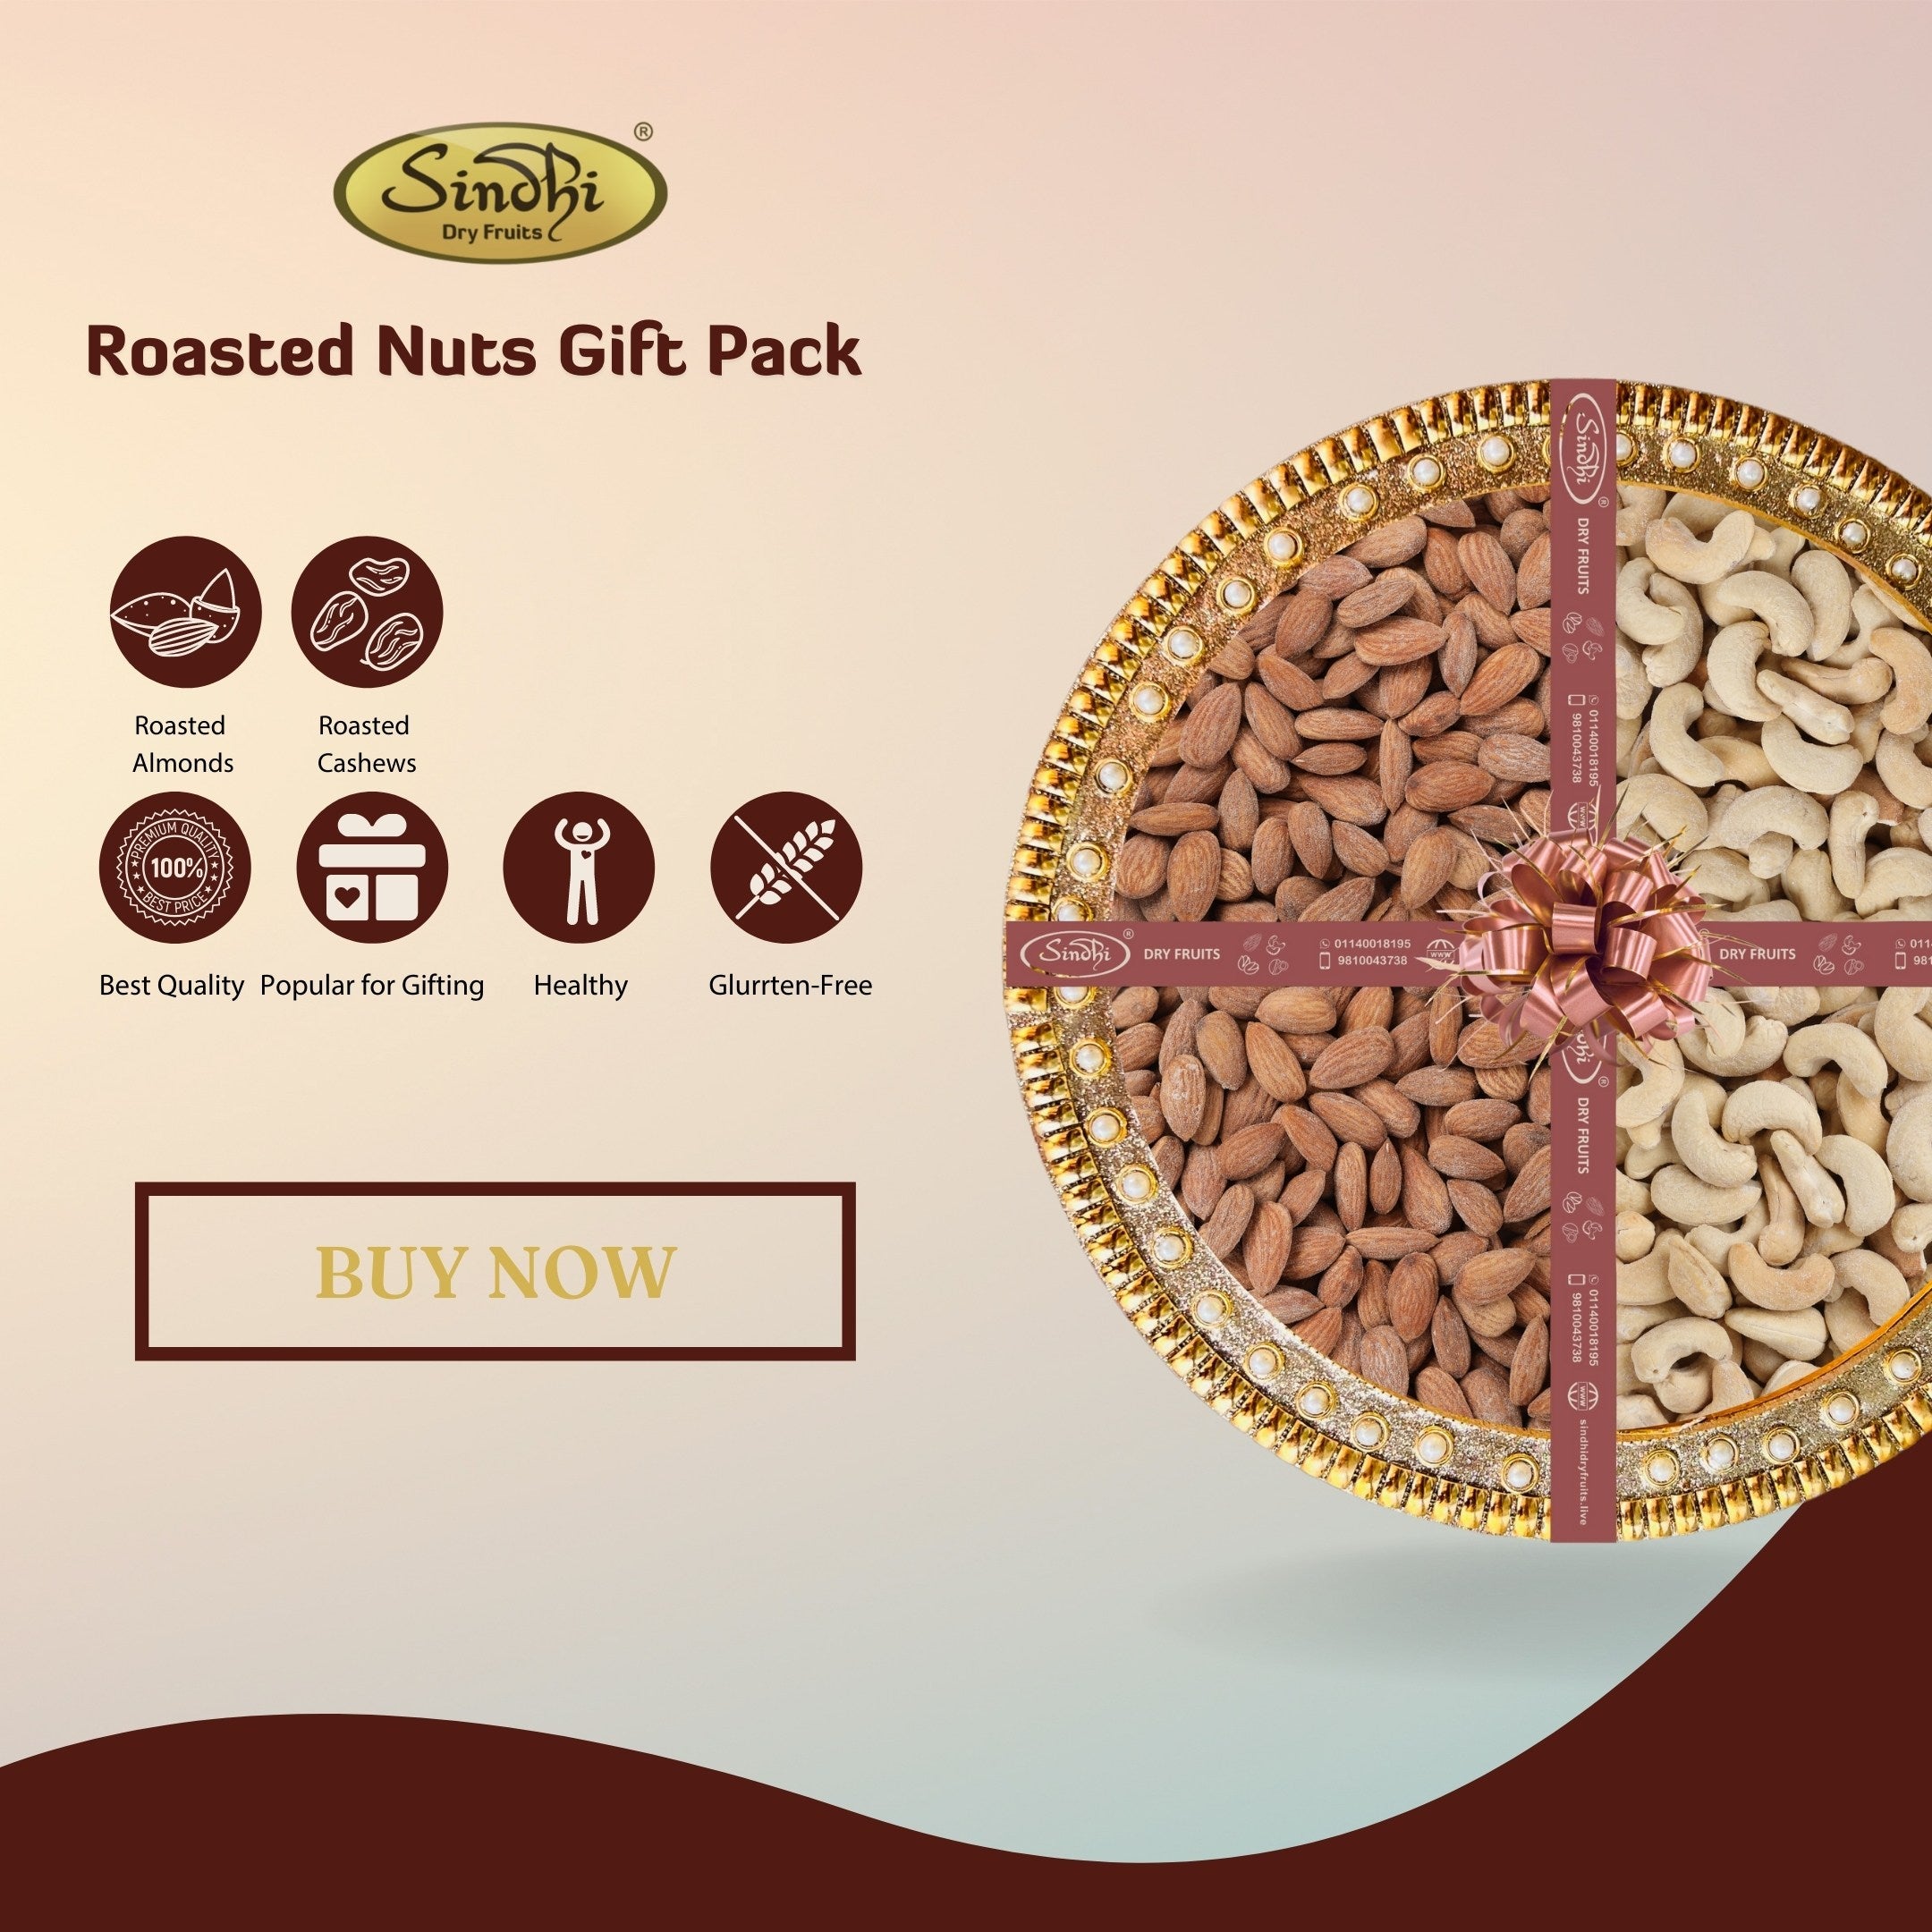 Premium Quality Roasted Almonds and Cashews